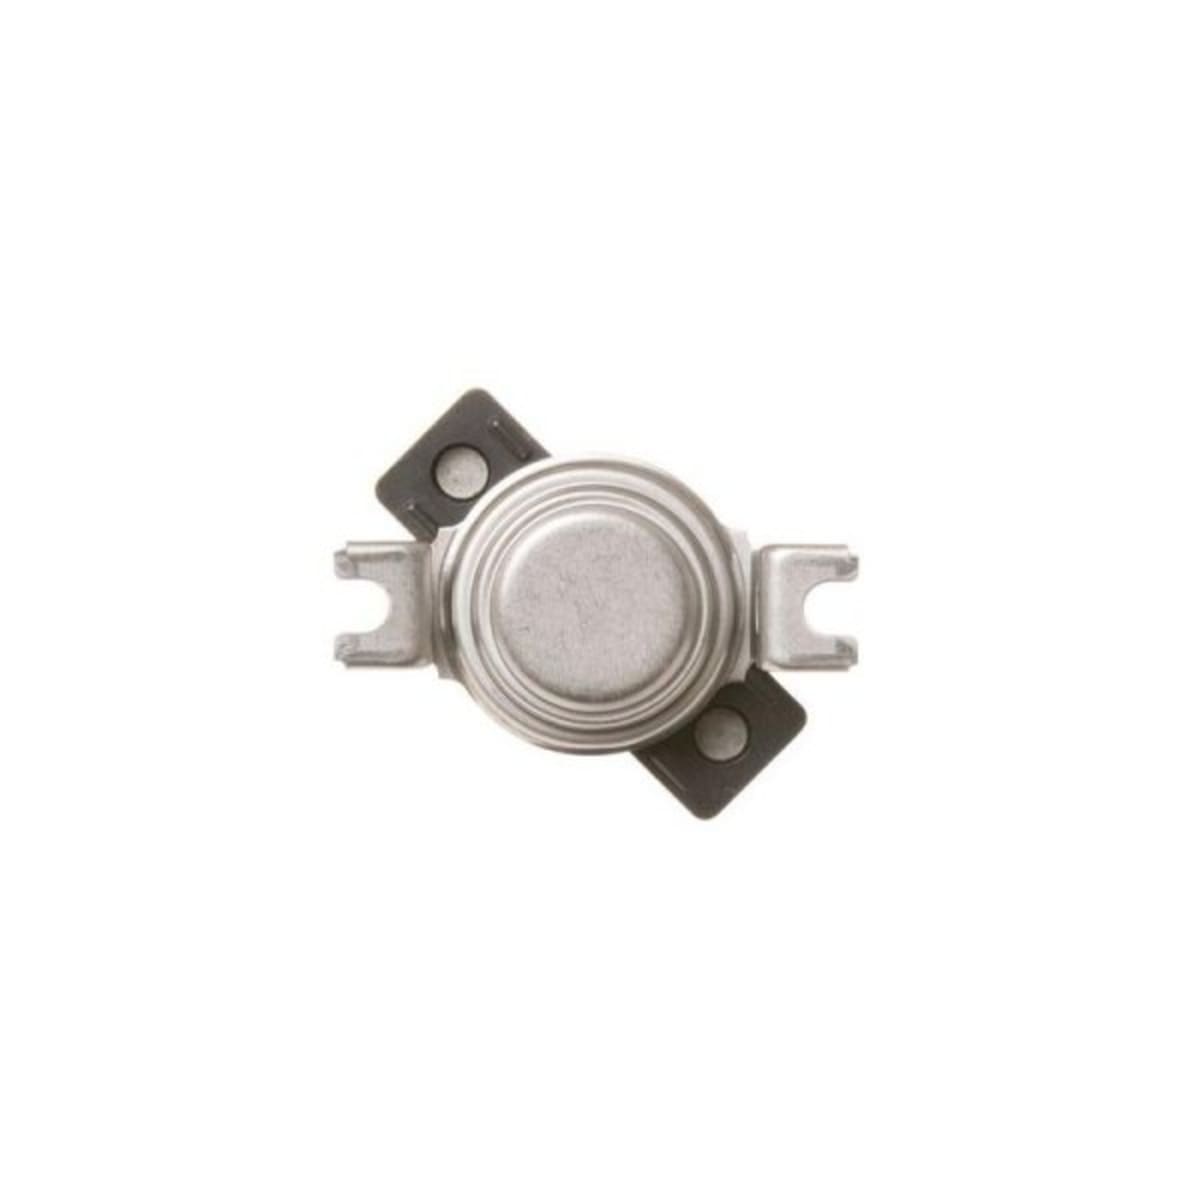 General Electric Replacement Dryer Left Safety Thermostat Part We4m528 Hd Supply,Best Gin And Tonic Recipe